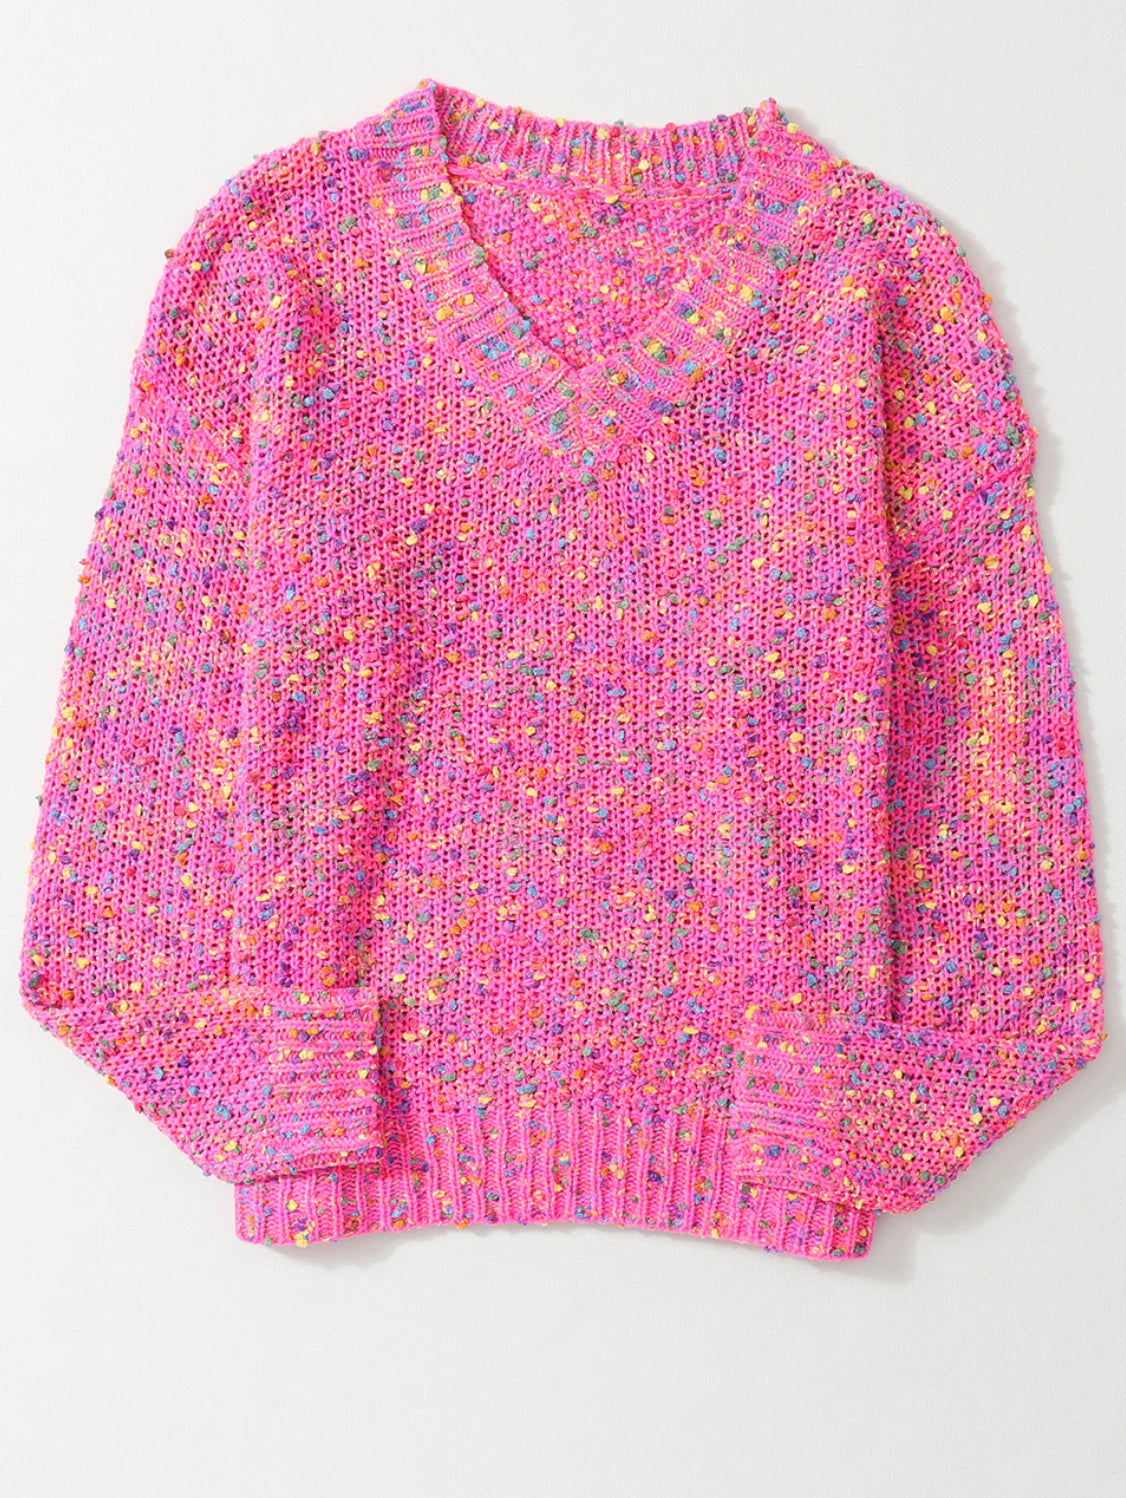 READY TO SHIP: SMALL - Pink Confetti Sweater